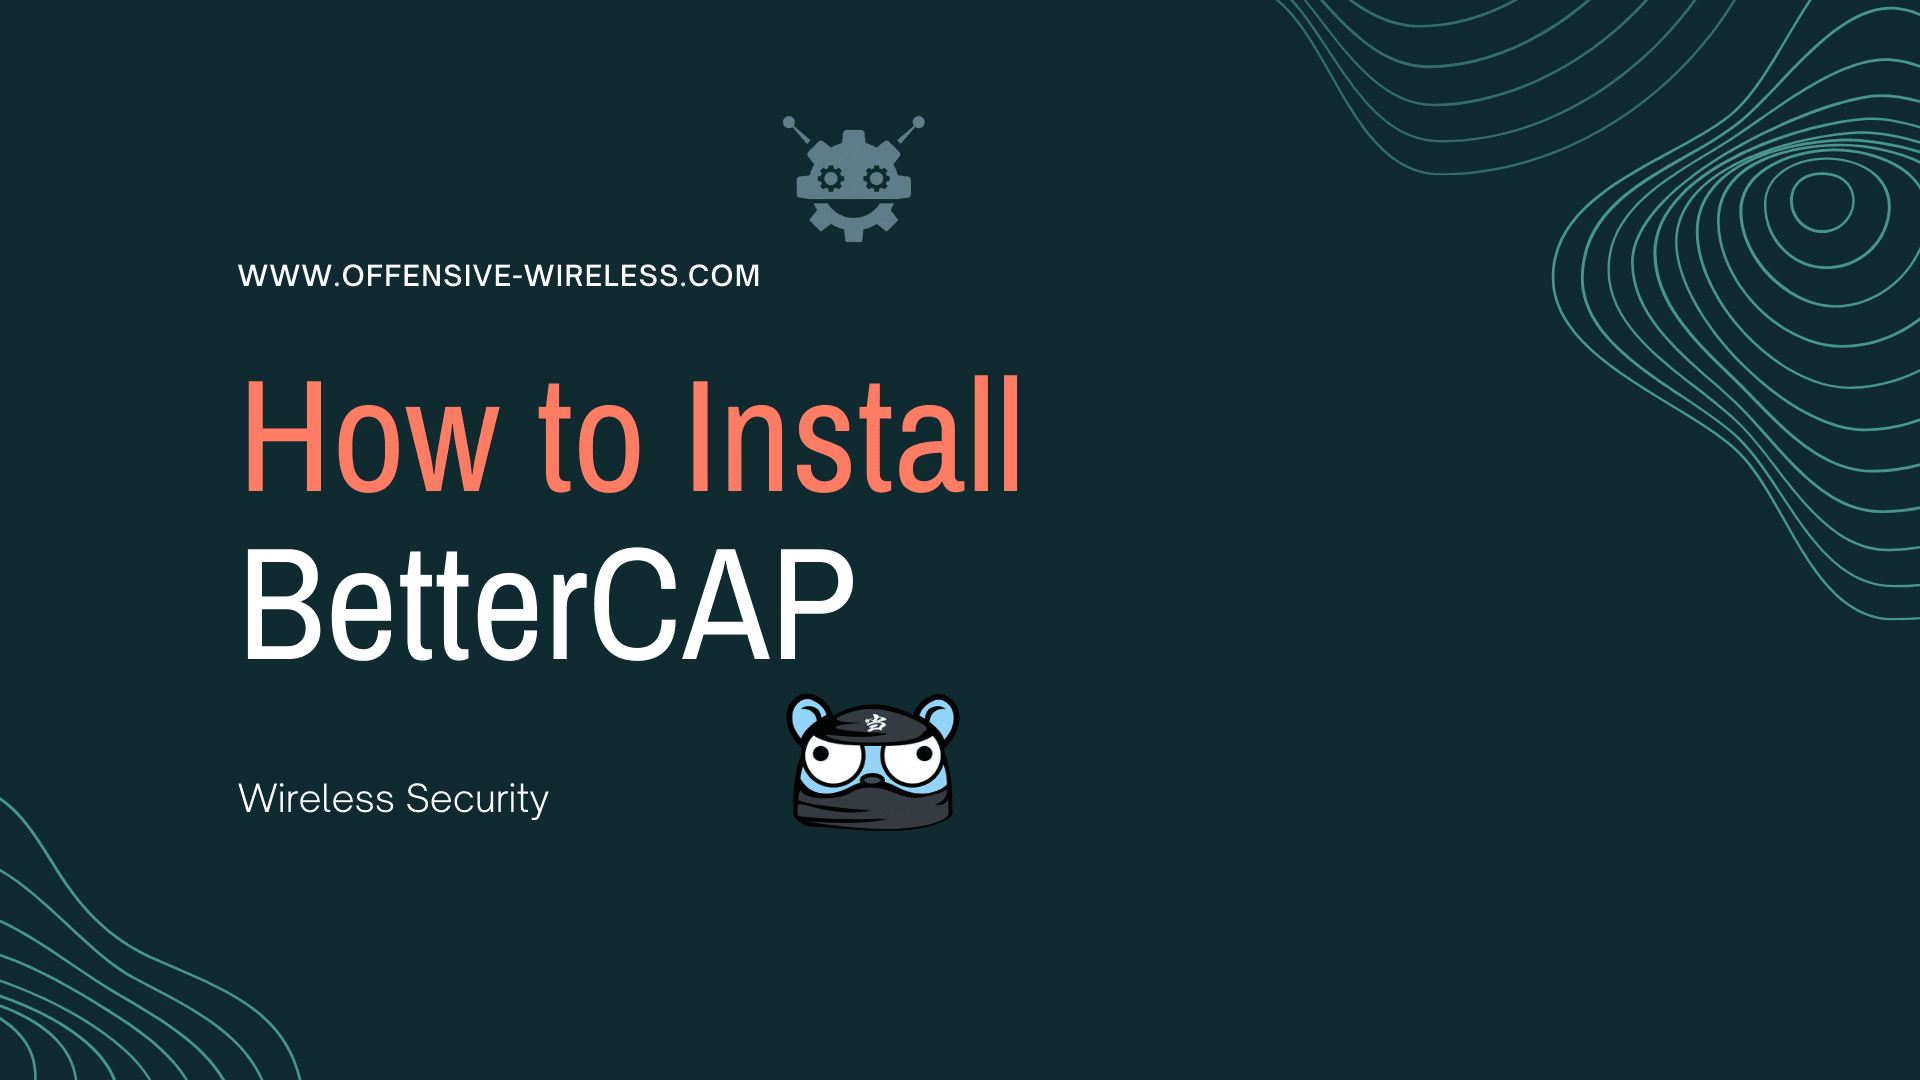 How to Install BetterCAP